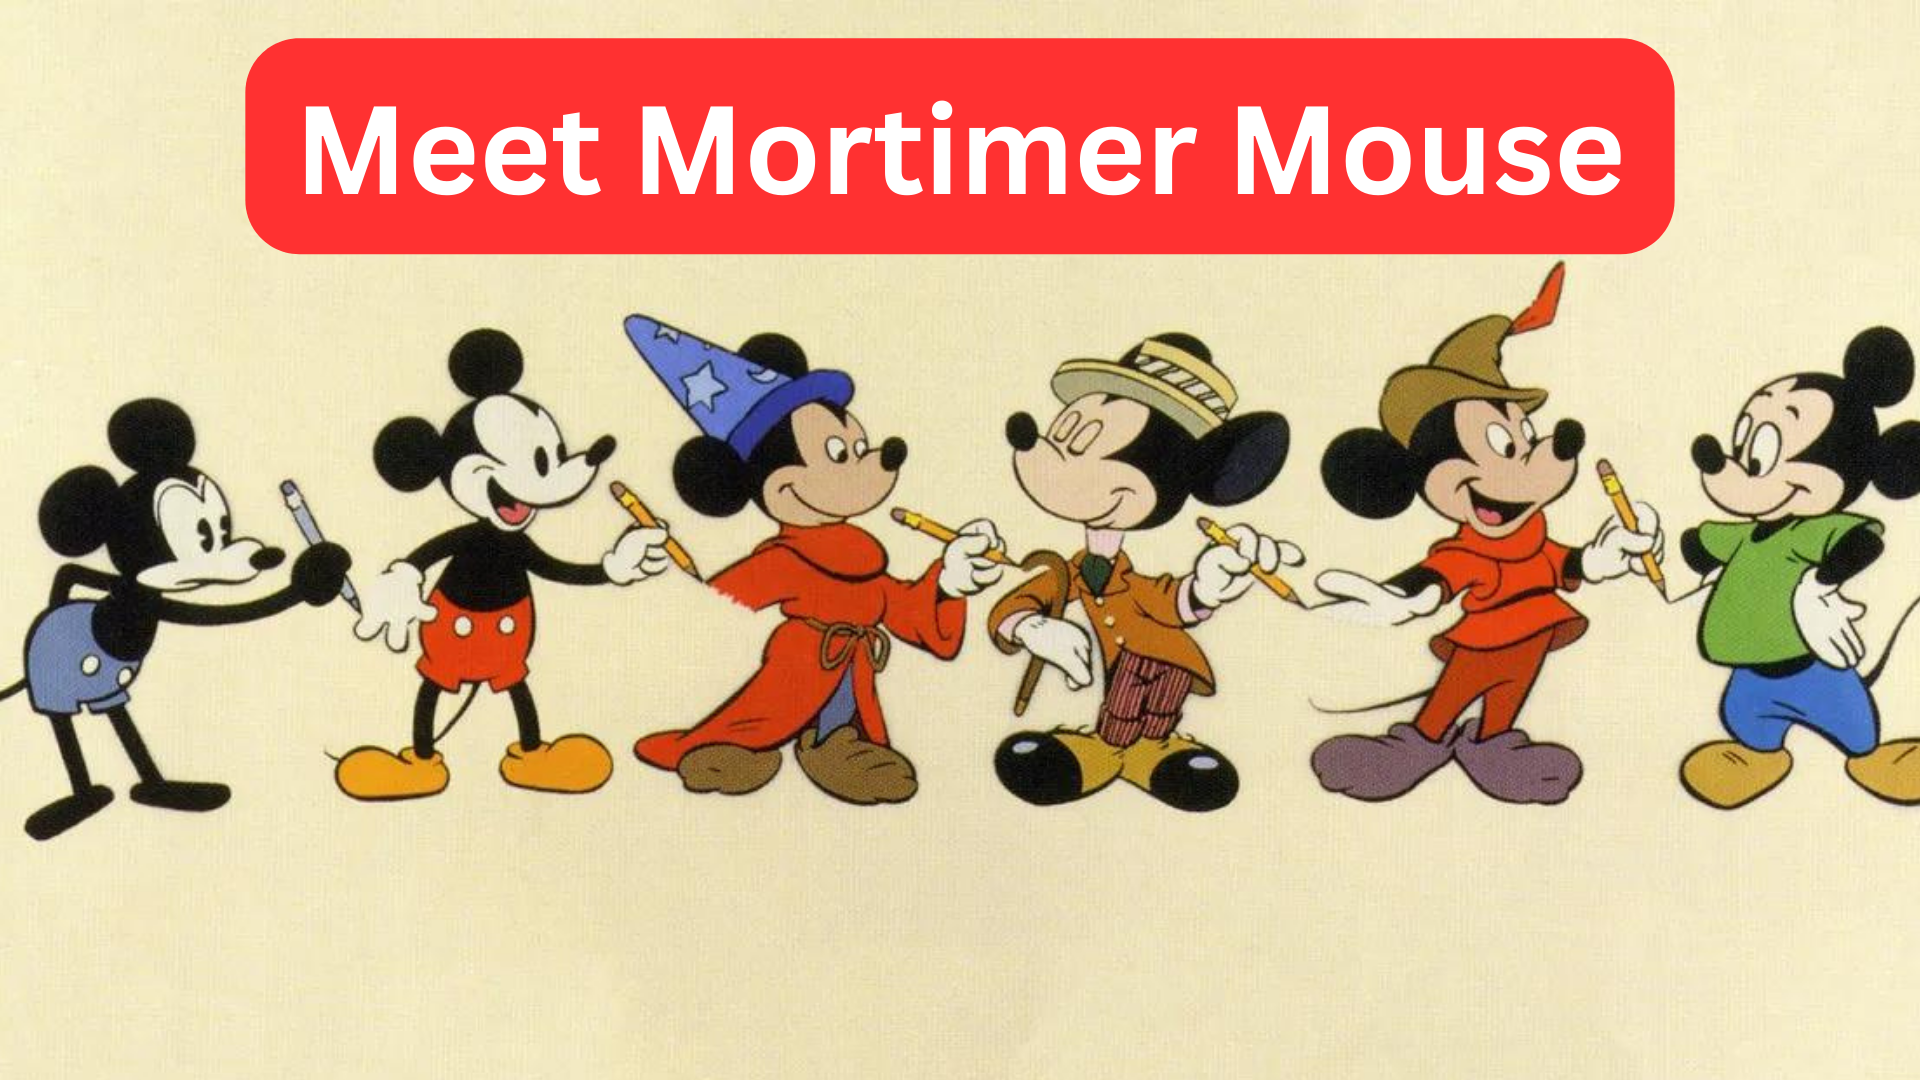 Mickey Mouse is now officially Mortimer Mouse